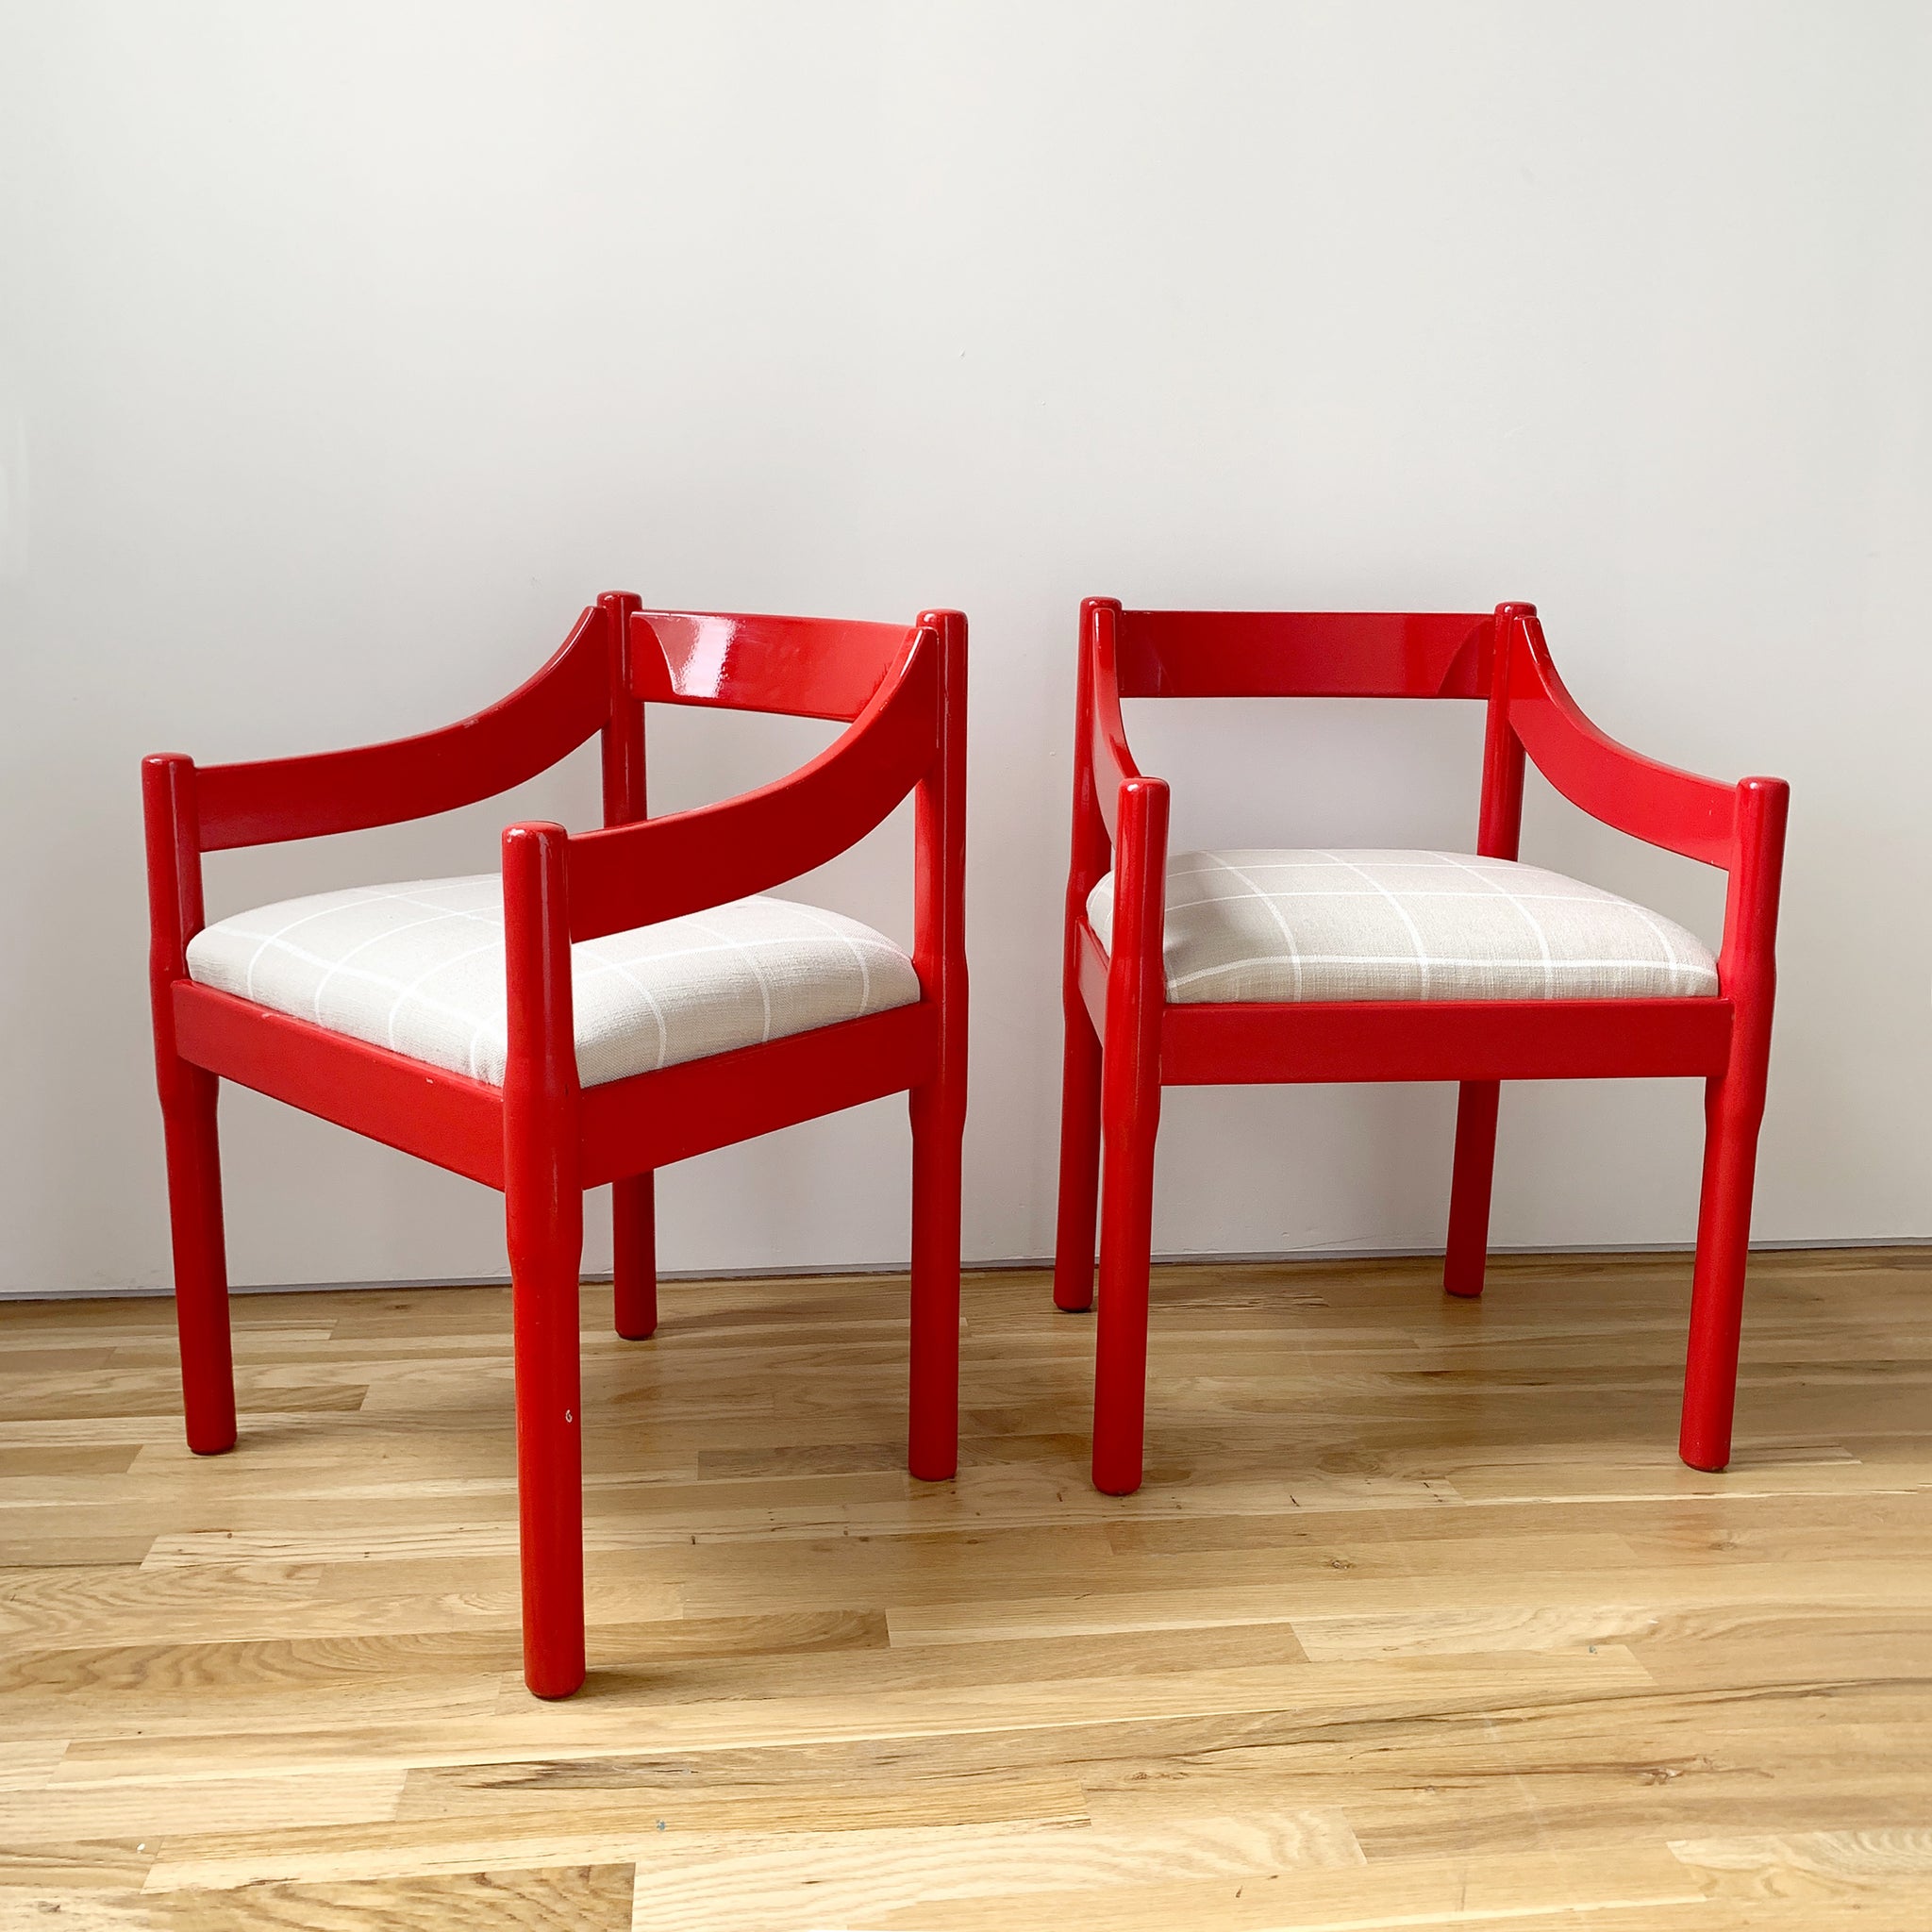 Vintage pair of "Carimate" Chairs by Vico Magistretti For Cassina, Italy 1959